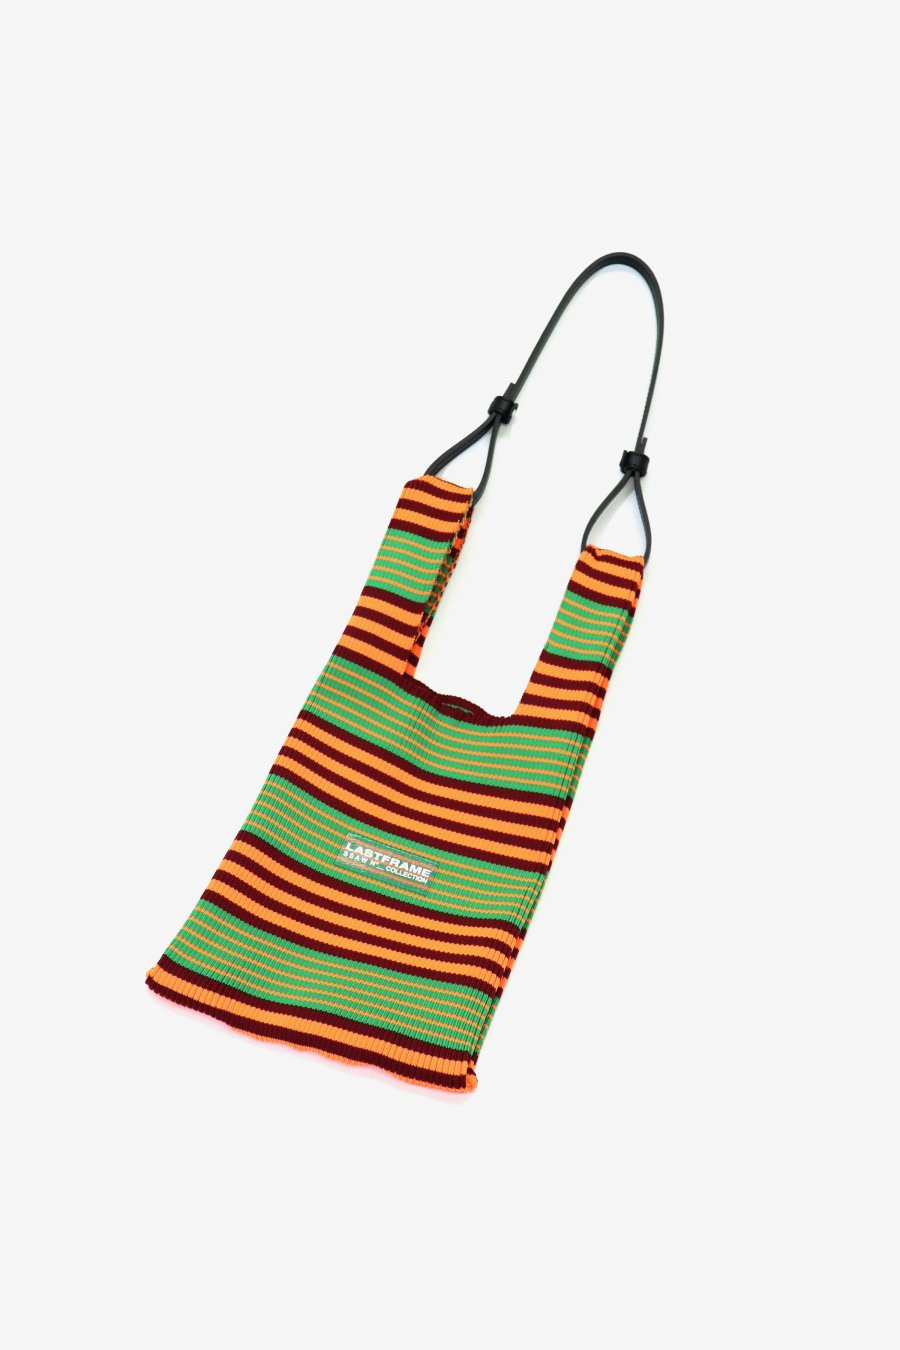 LASTFRAME  MULTICOLOR STRIPE MARKET BAG SMALL (NEON ORANGE x BORDEAUX)<img class='new_mark_img2' src='https://img.shop-pro.jp/img/new/icons15.gif' style='border:none;display:inline;margin:0px;padding:0px;width:auto;' />